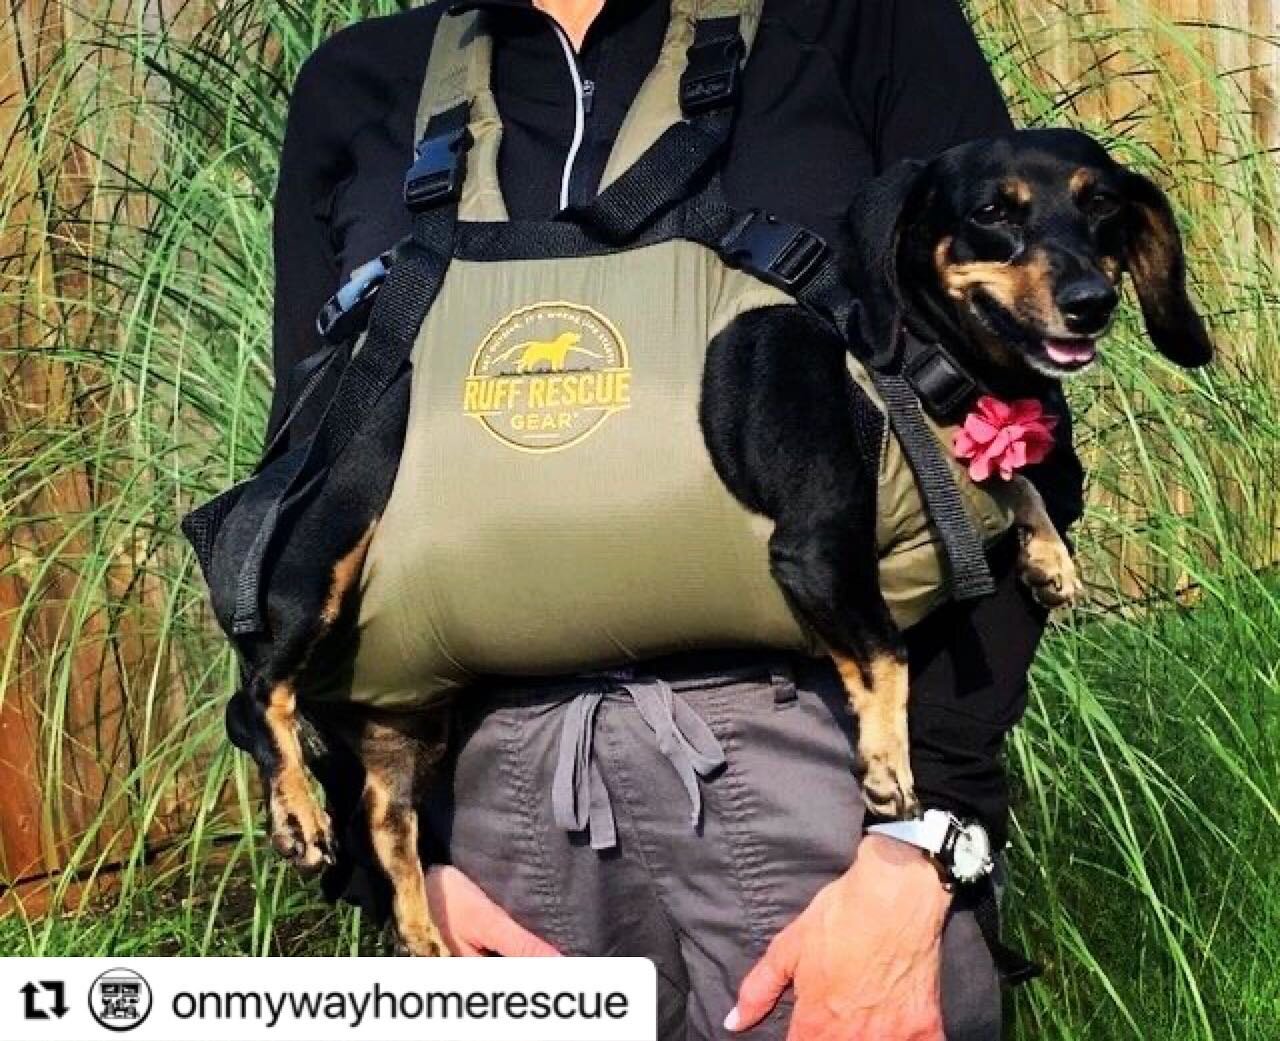 #Repost @onmywayhomerescue with @use.repost
・・・
We highly recommend the Pup Traveler for safely incorporating your IVDD, disabled, or older dogs into your active lifestyle. 

Check them out!

https://www.ruffrescuegear.com/shop/pup-traveler

#ruffres